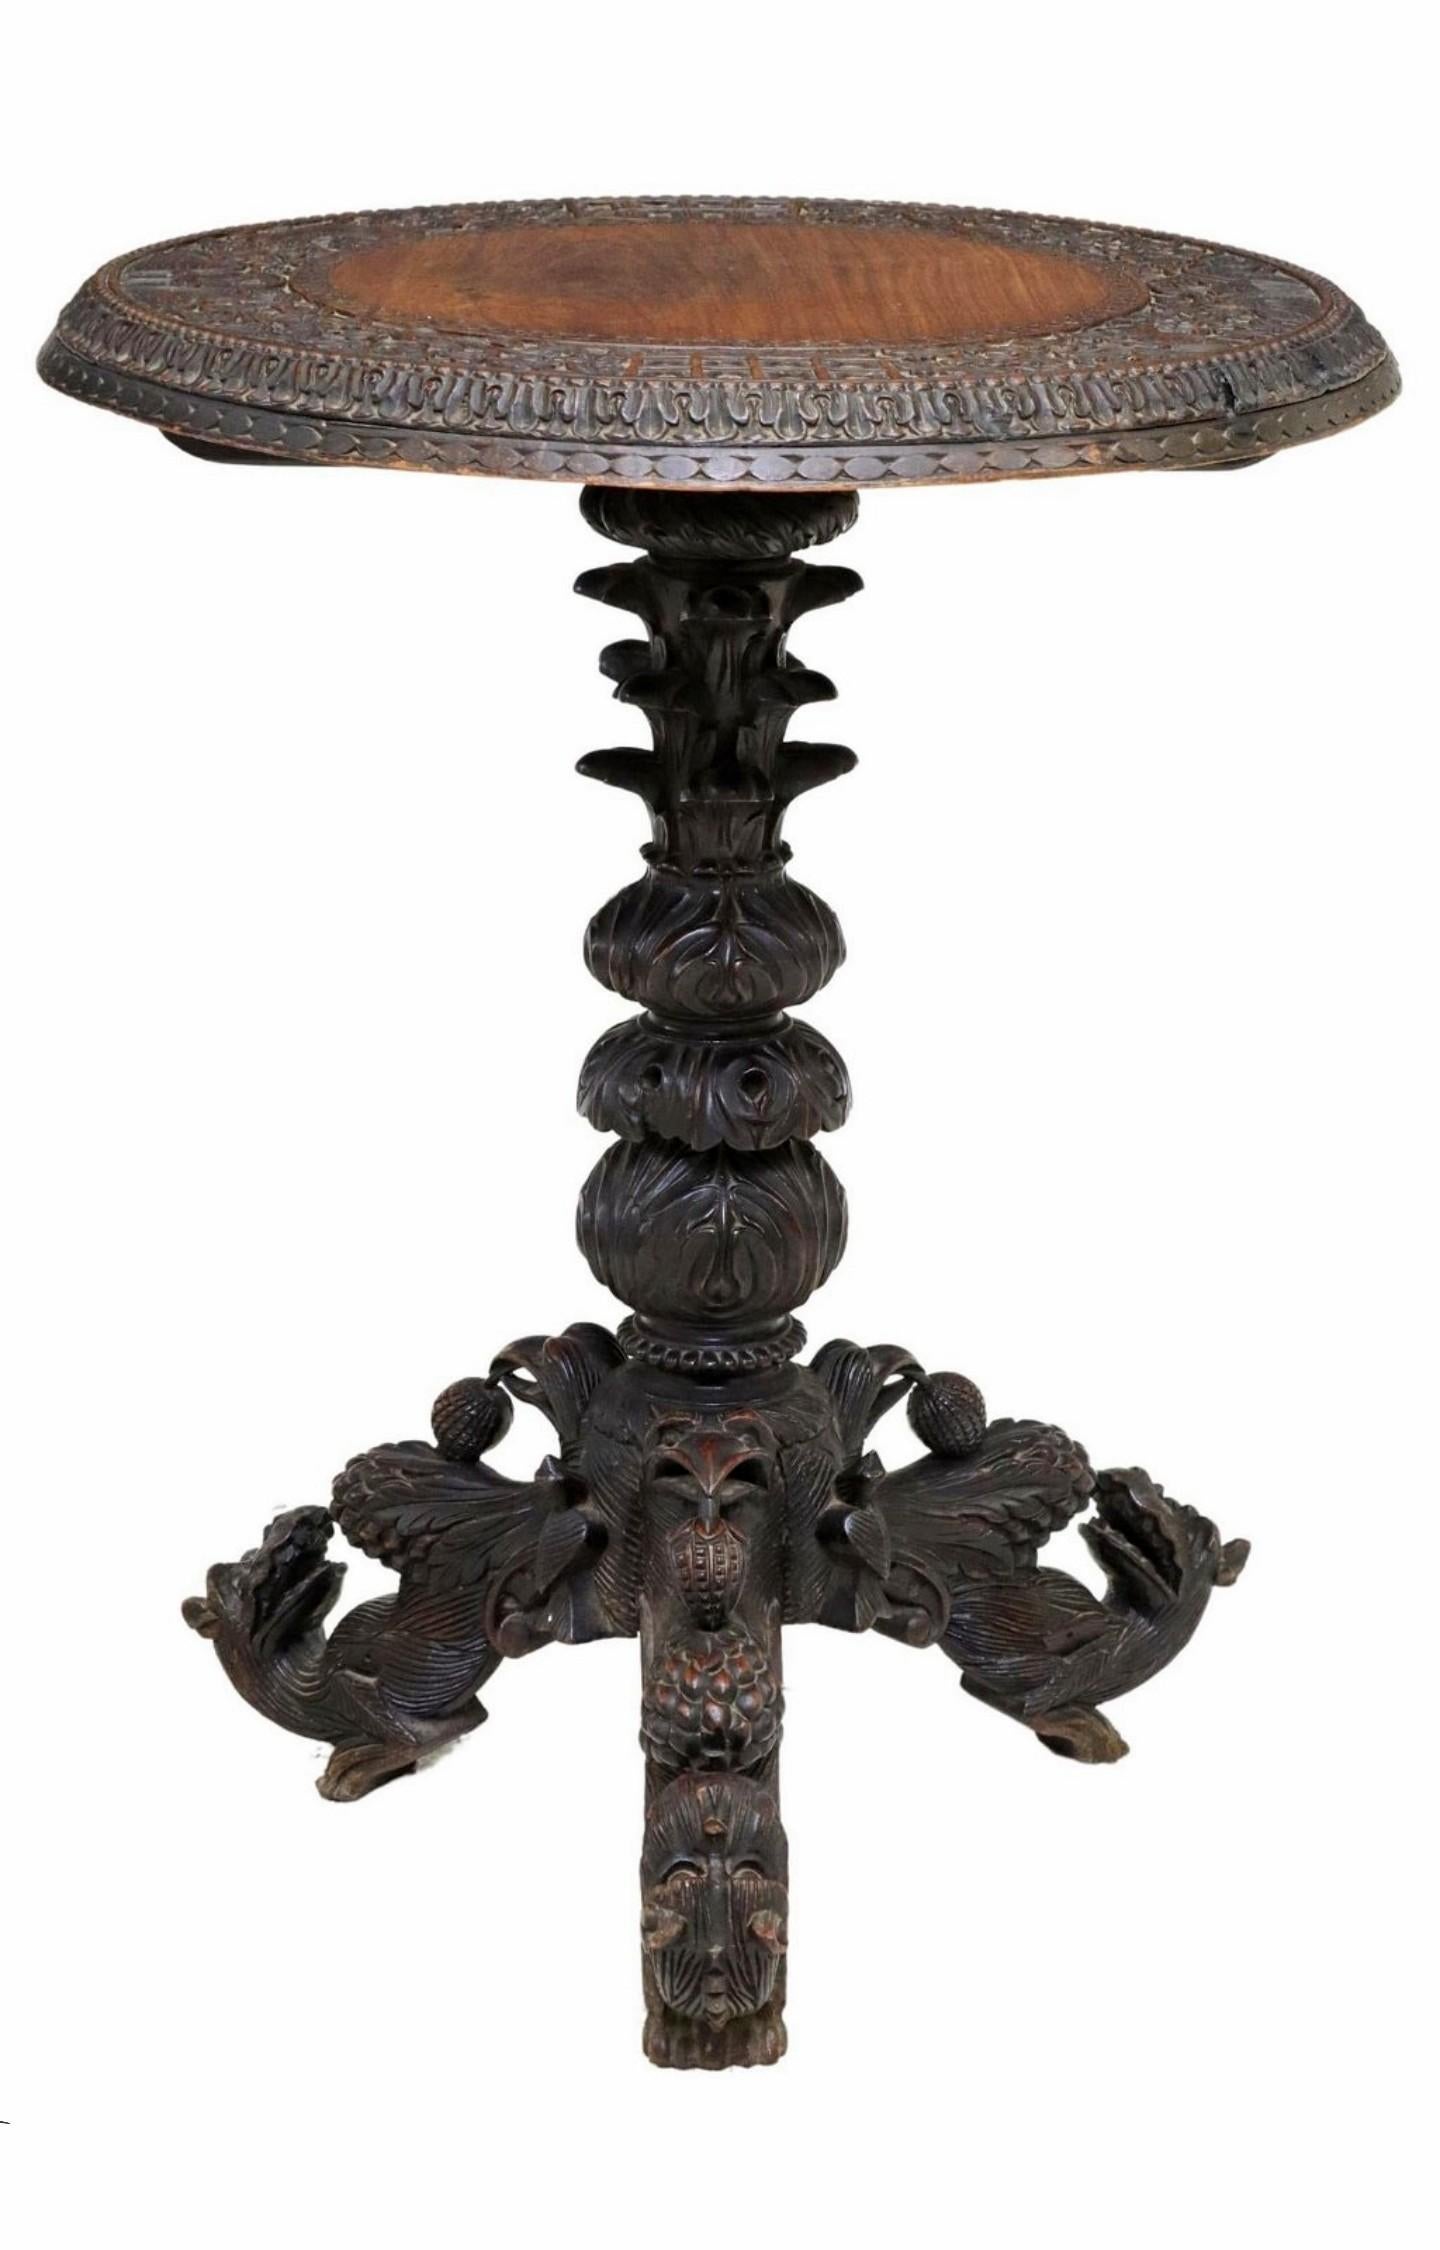 A rare and most impressive antique Burmese hand-carved hardwood side table. circa 1880

Exquisitely hand-crafted in Burma (present day Myanmar) in the late 19th century, traditional Southeast Asian Mandalay taste with heavy Anglo-Indian British